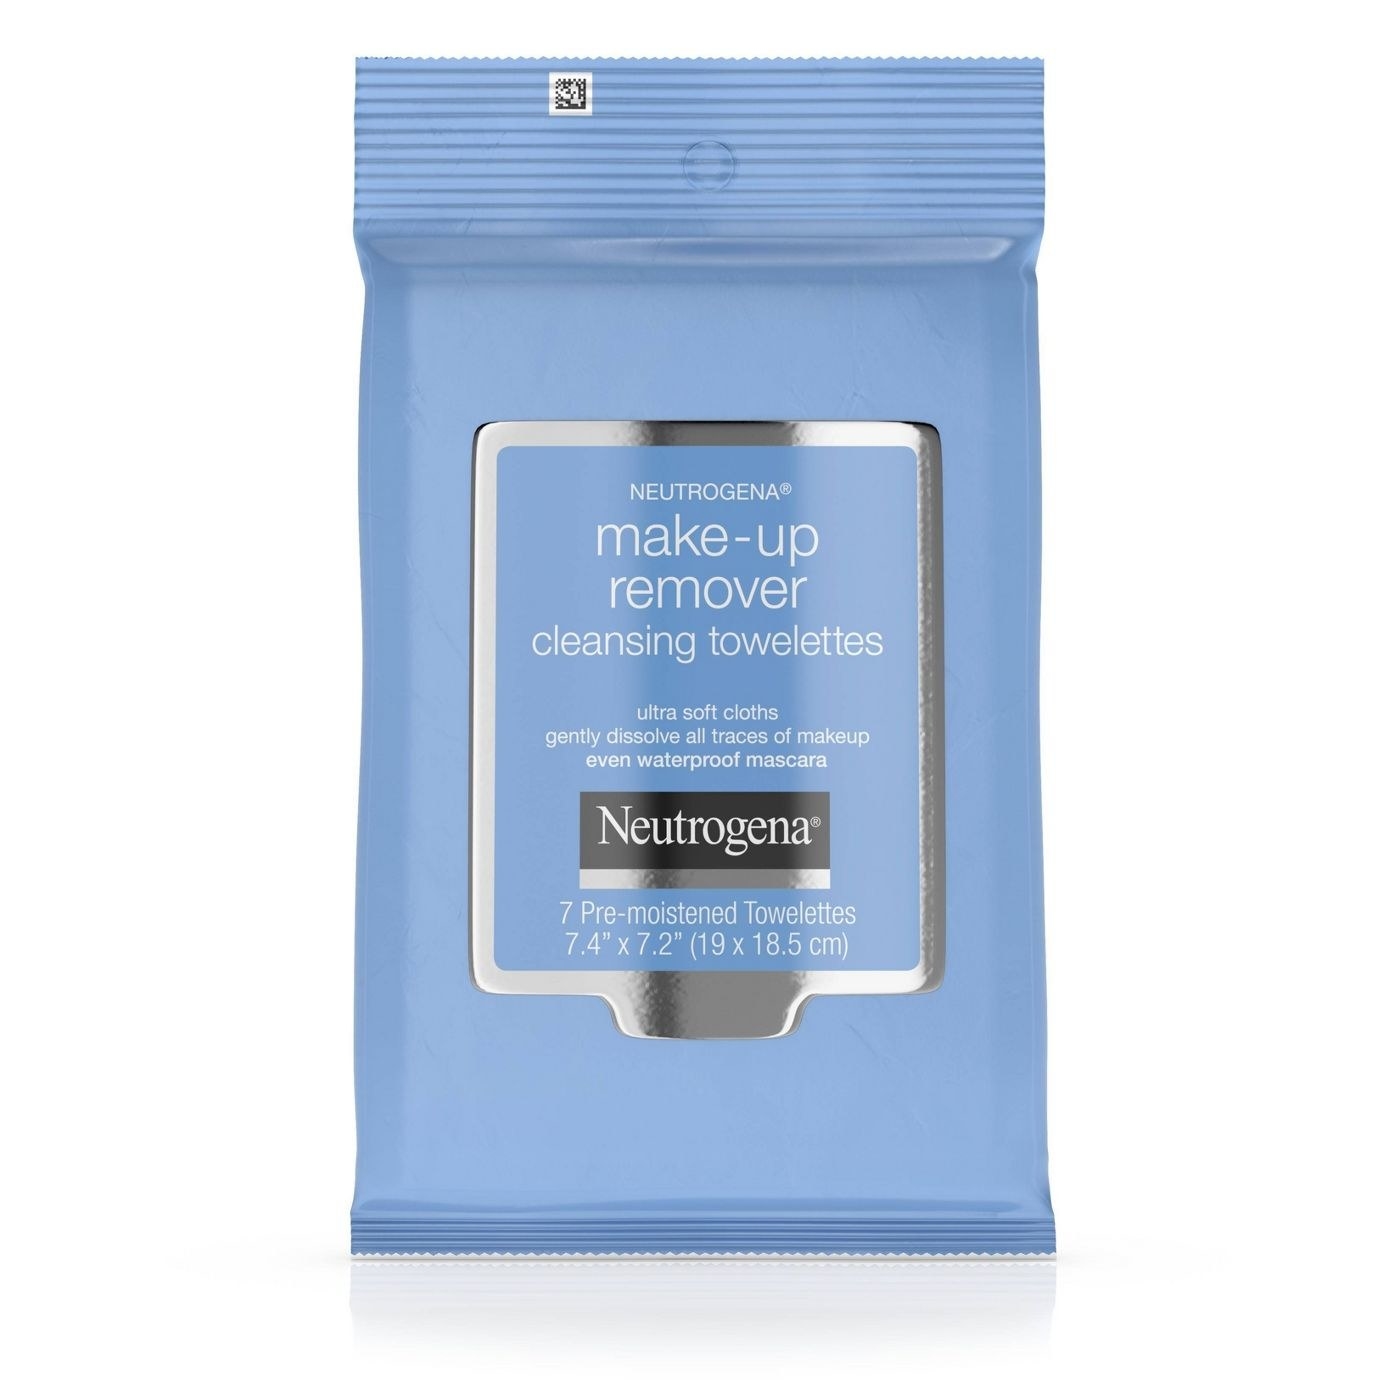 The pack of Neutrogena makeup removing wipes